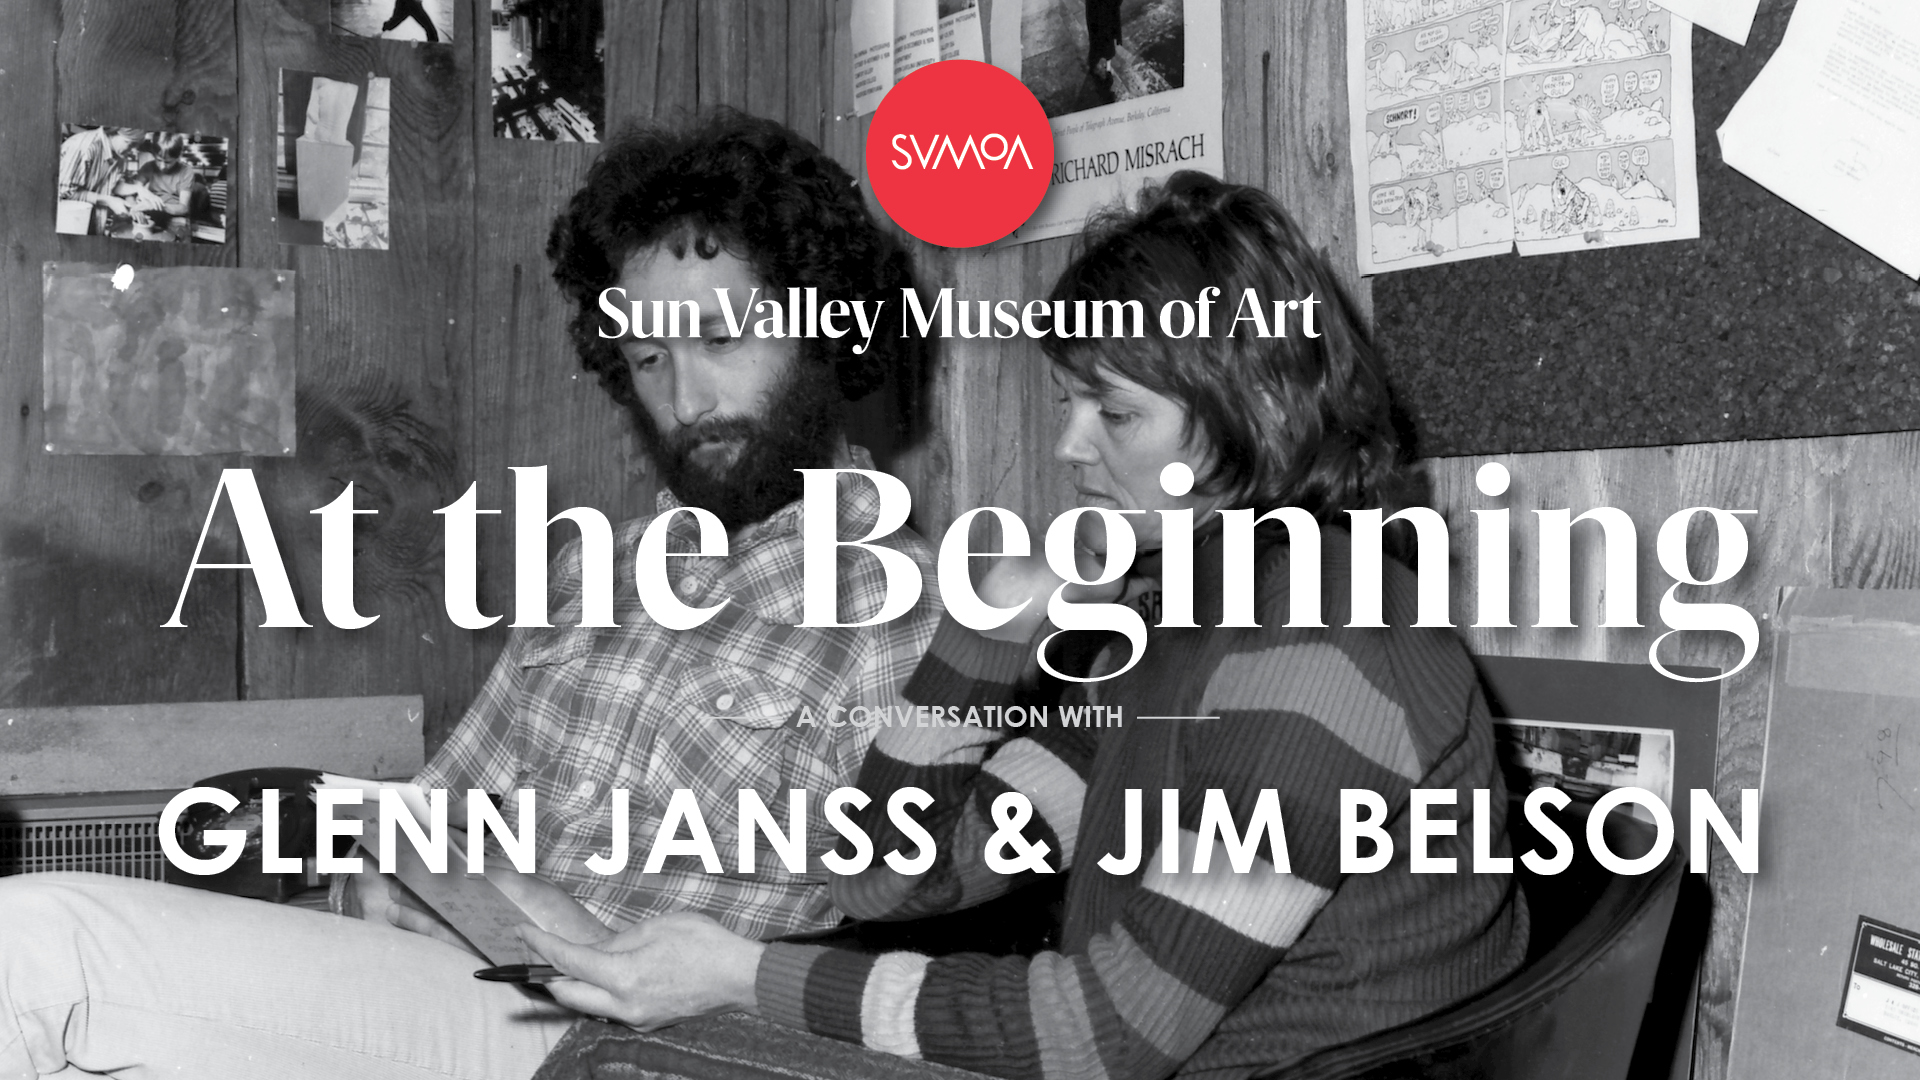 A Conversation with Glenn Janss and Jim Belson